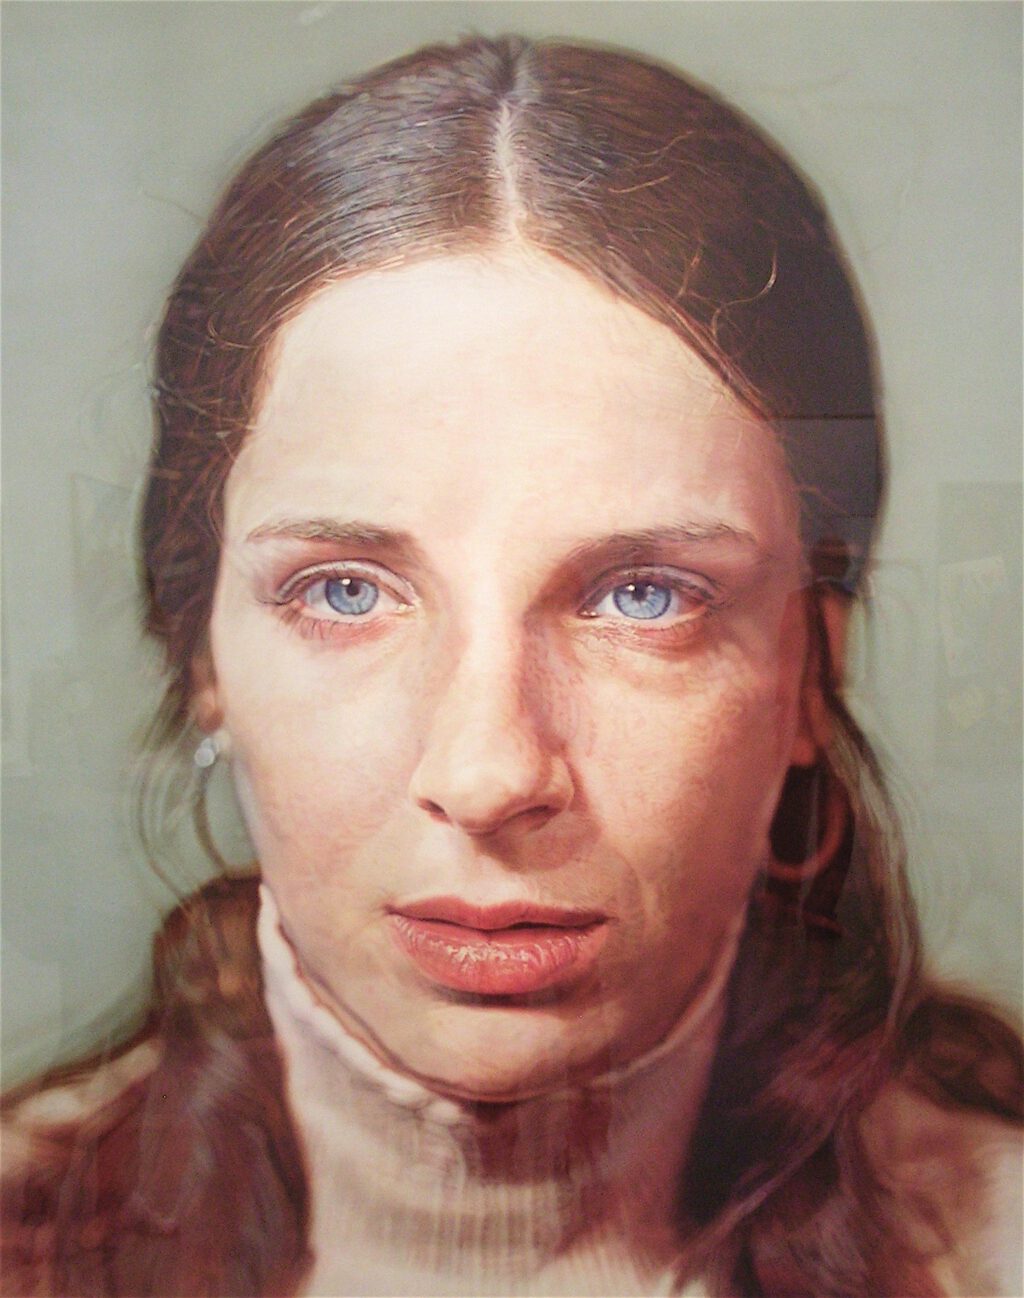 Chuck Close ‘Leslie’ 1972-1973 watercolor on paper mounted on canvas 184.2 x 144.8 cm